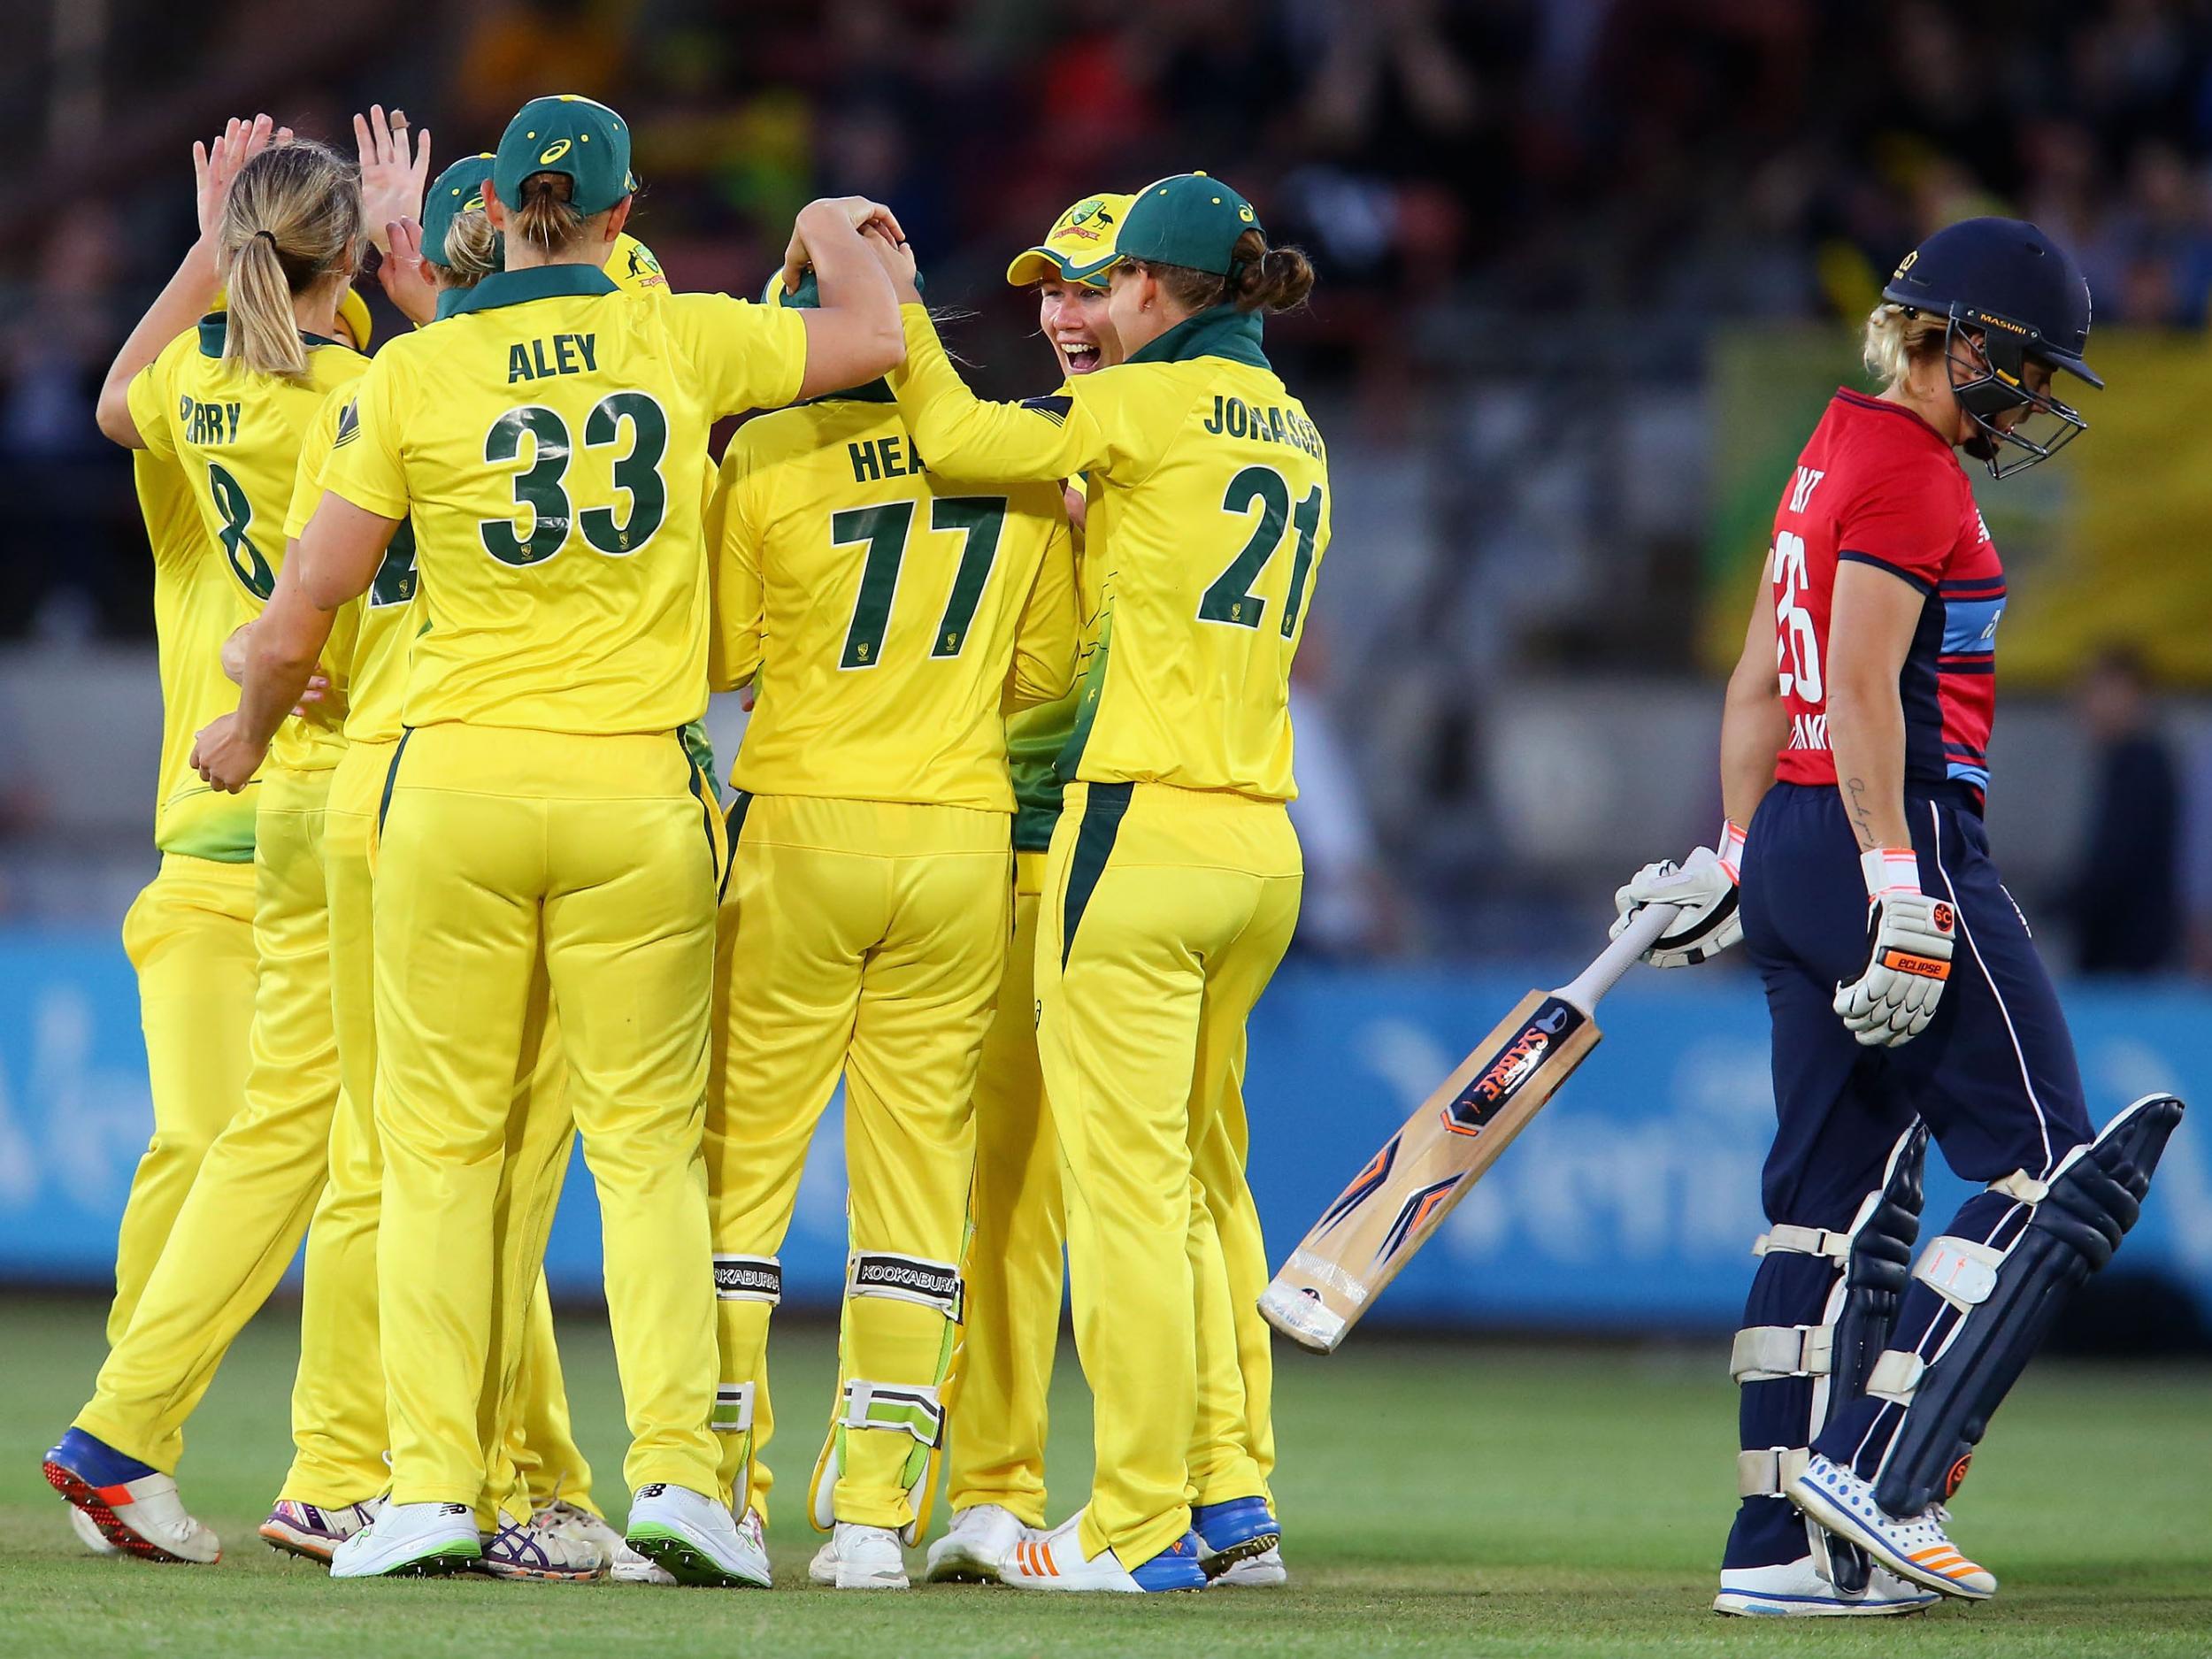 Australia chased down 133 with six wickets to spare